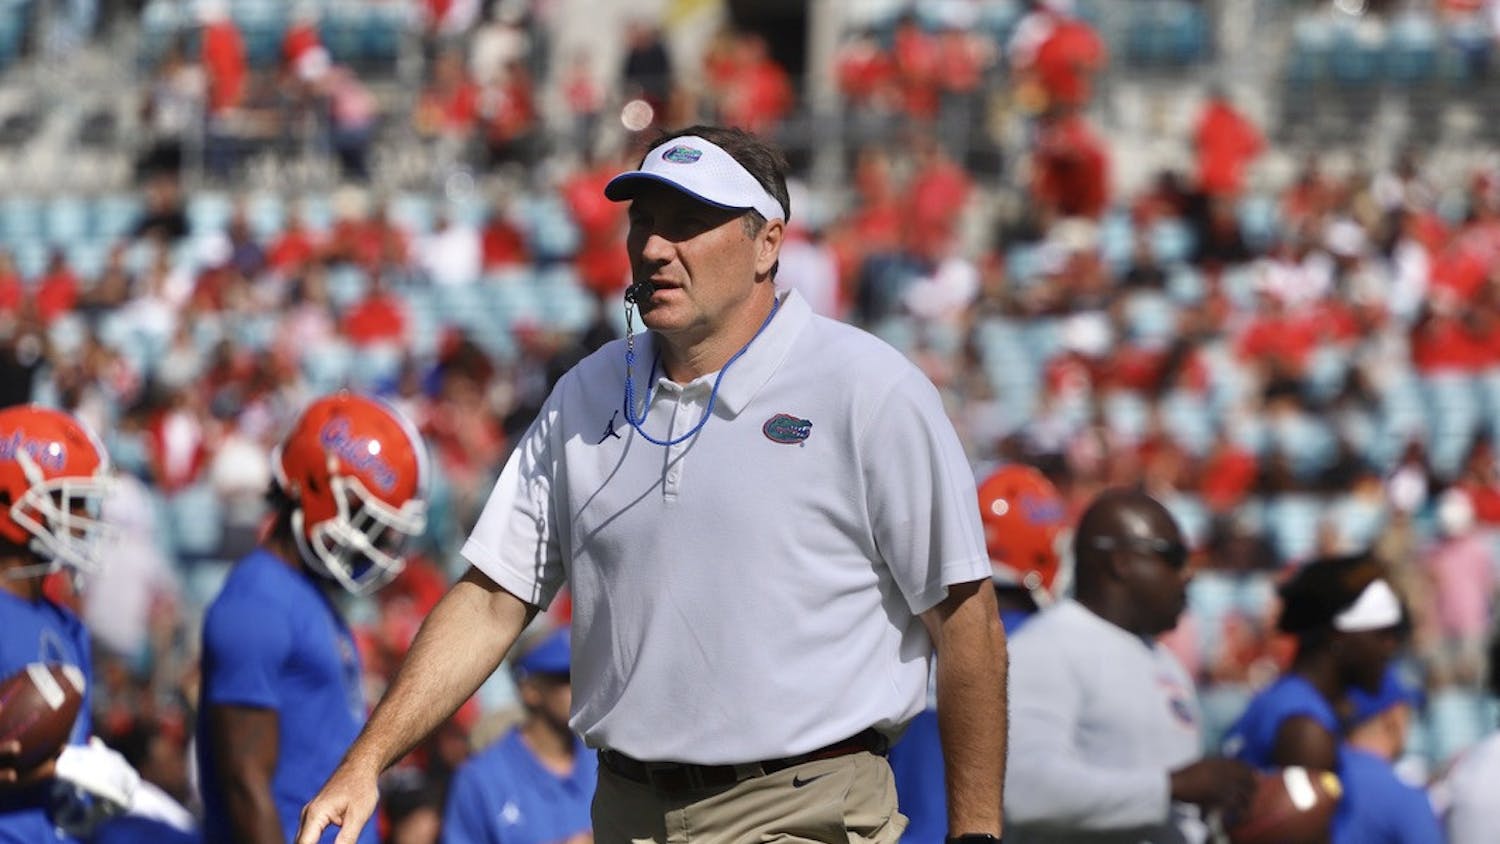 Florida football head coach Dan Mullen pictured on the field at TIAA Bank Field in Jacksonville on Oct. 30 before Florida played Georgia.